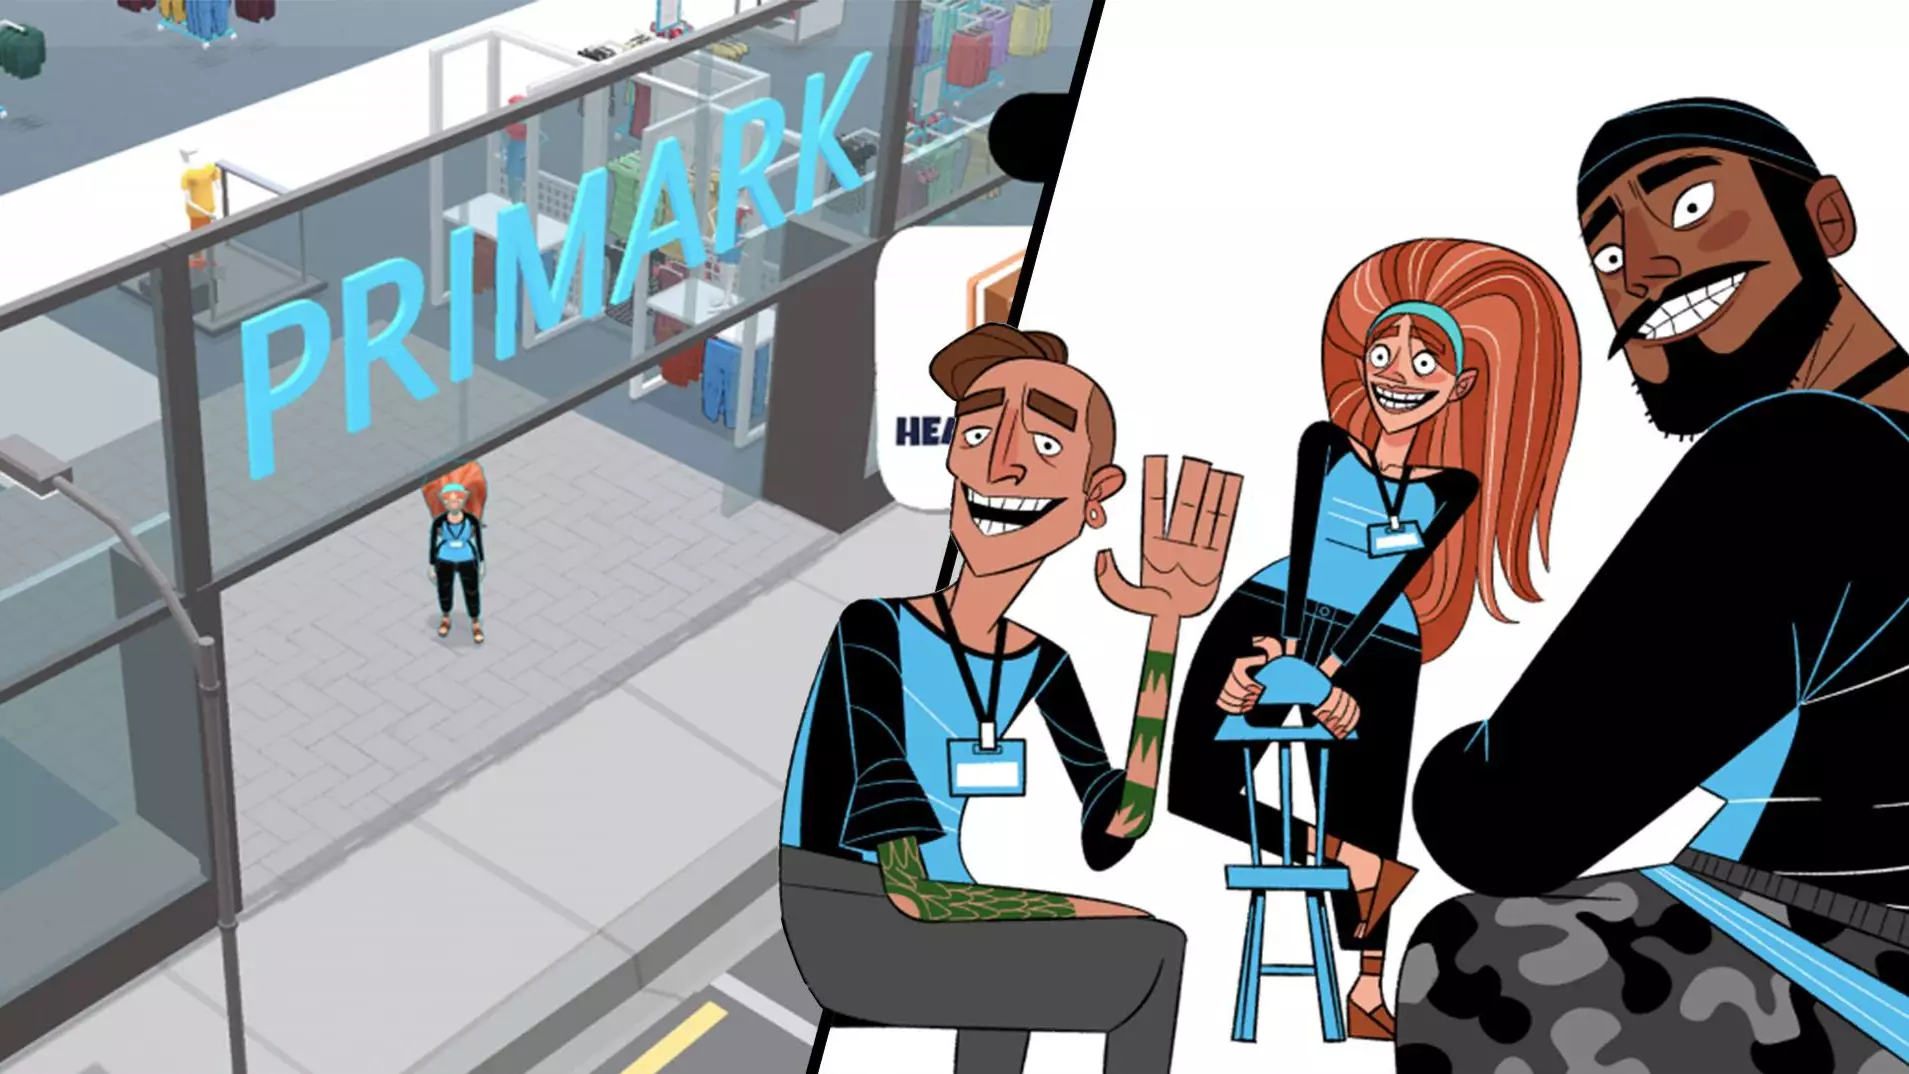 Primark, As In The Shop, Is Releasing A Mobile Game, Because Why Not